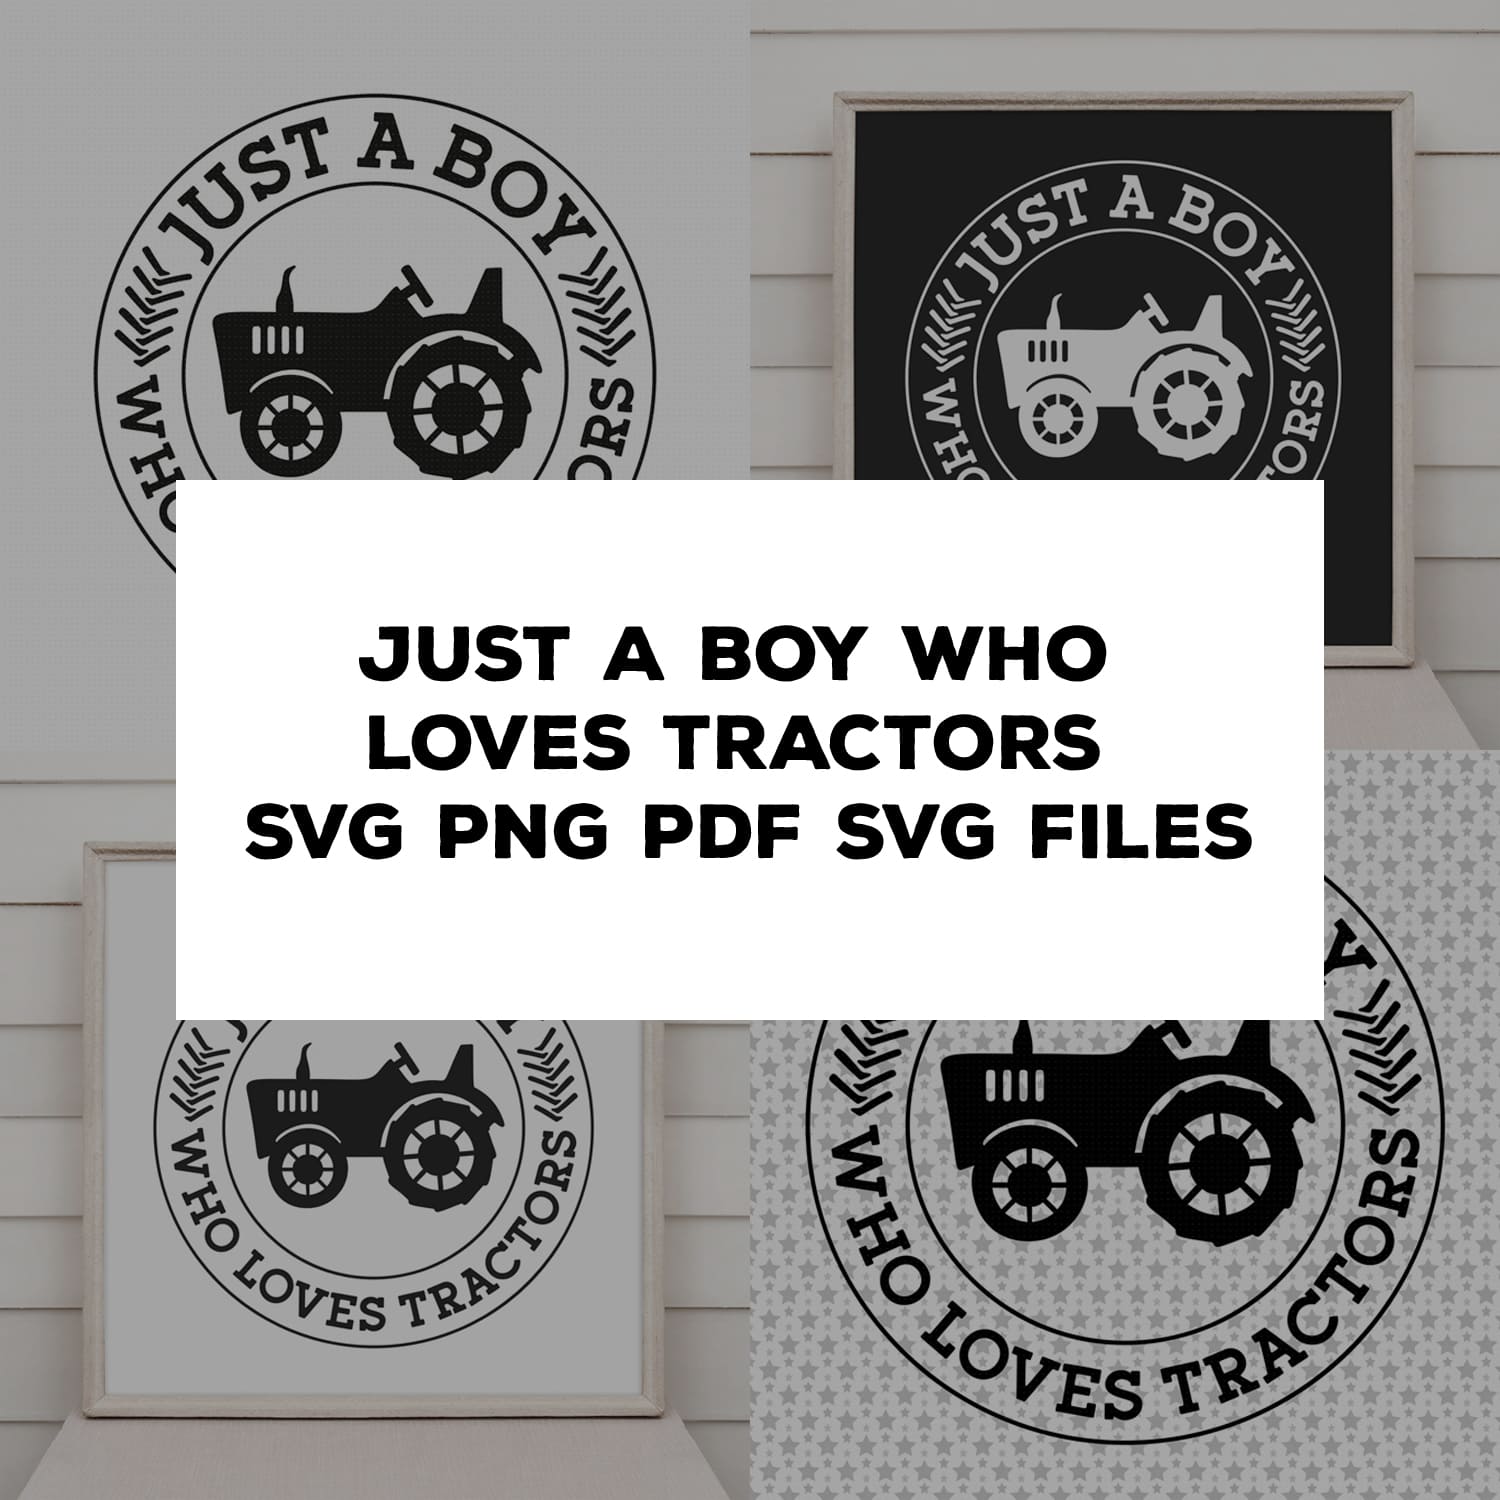 just a boy who loves tractors svg png pdf svg files for printing.